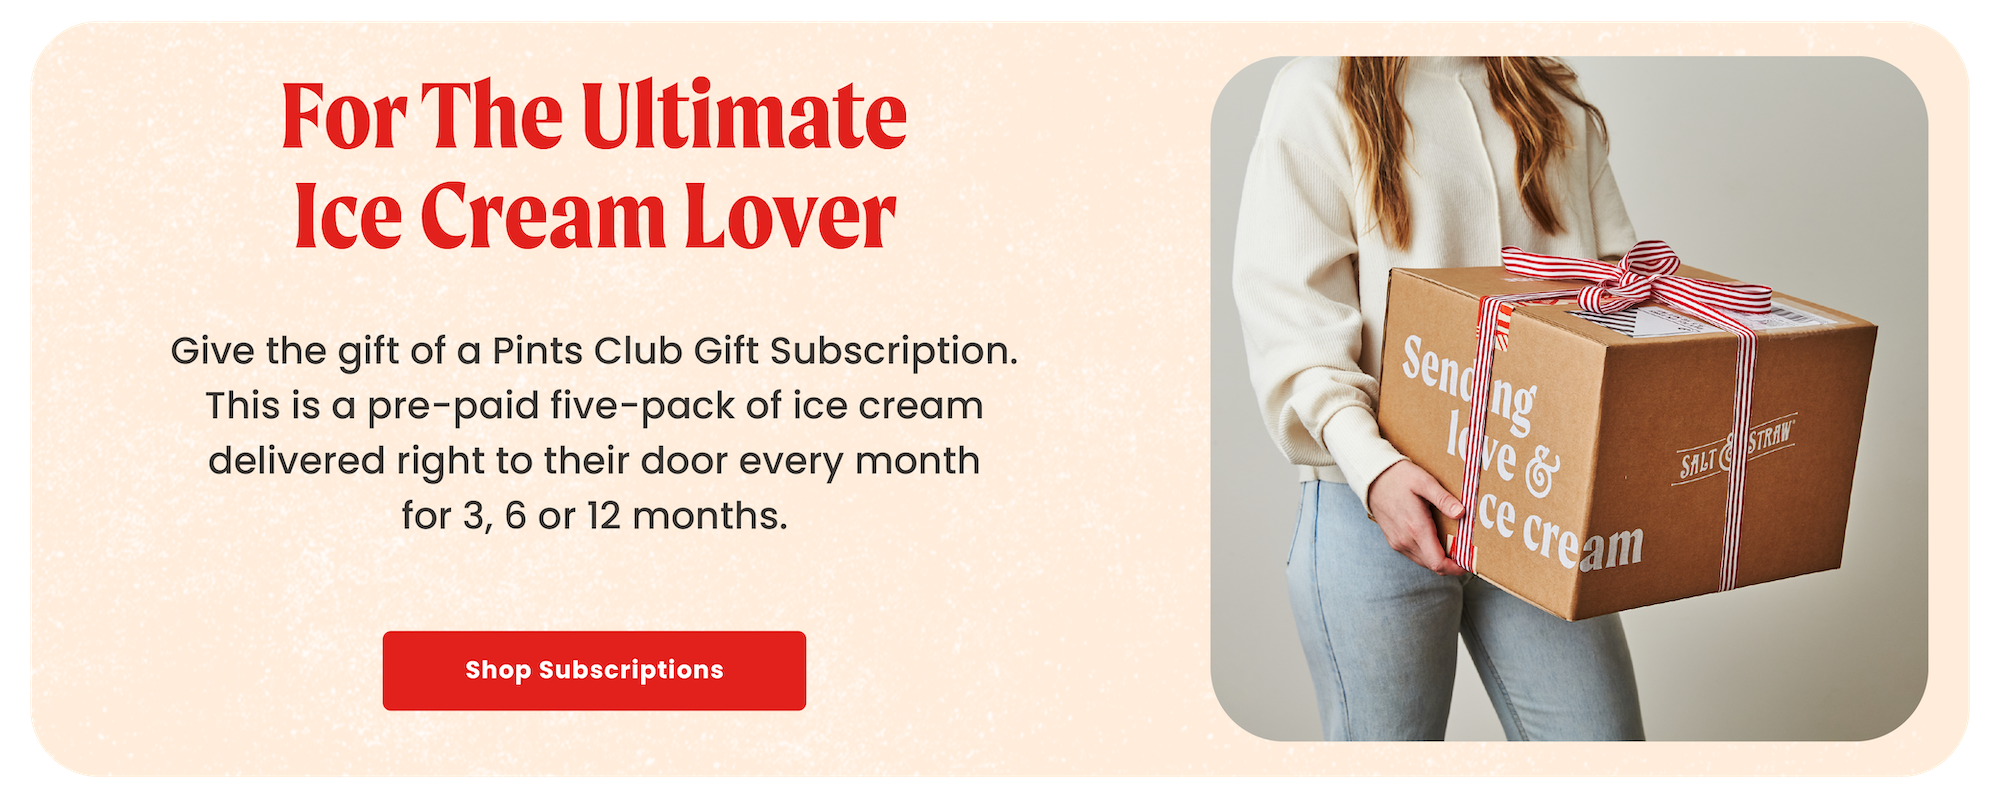 Give the gift of a pints club subscription . This is a pre-paid five-pack of ice cream delivered right to their door every month for 3, 6, or 12 months.